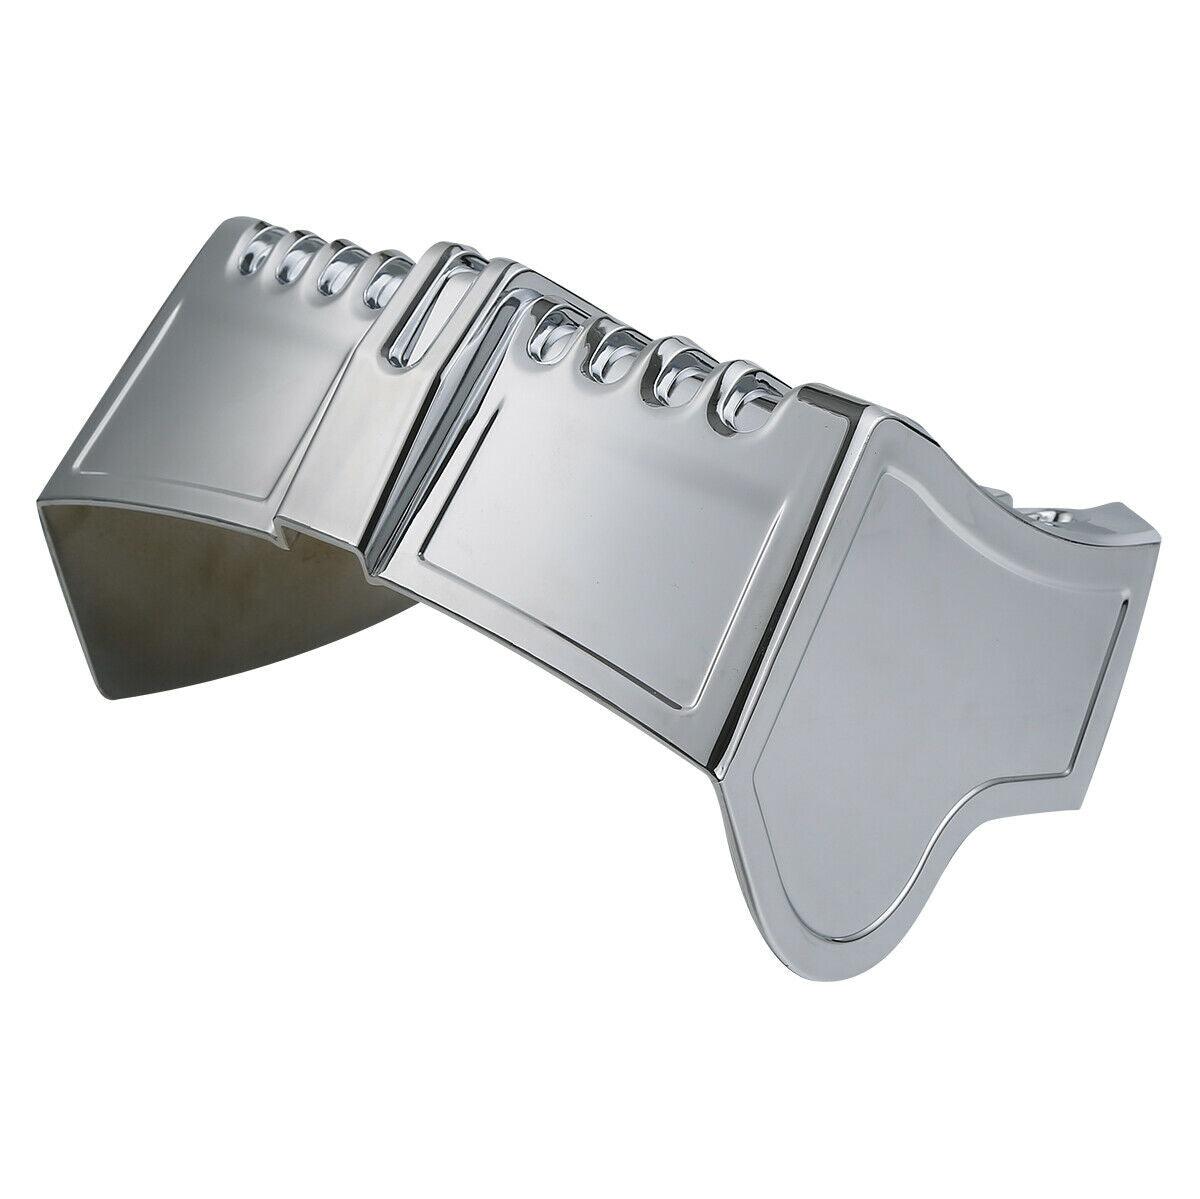 Chrome Oil Cooler Cover For Harley Touring Road King Street Electra Glide 17-20 - Moto Life Products